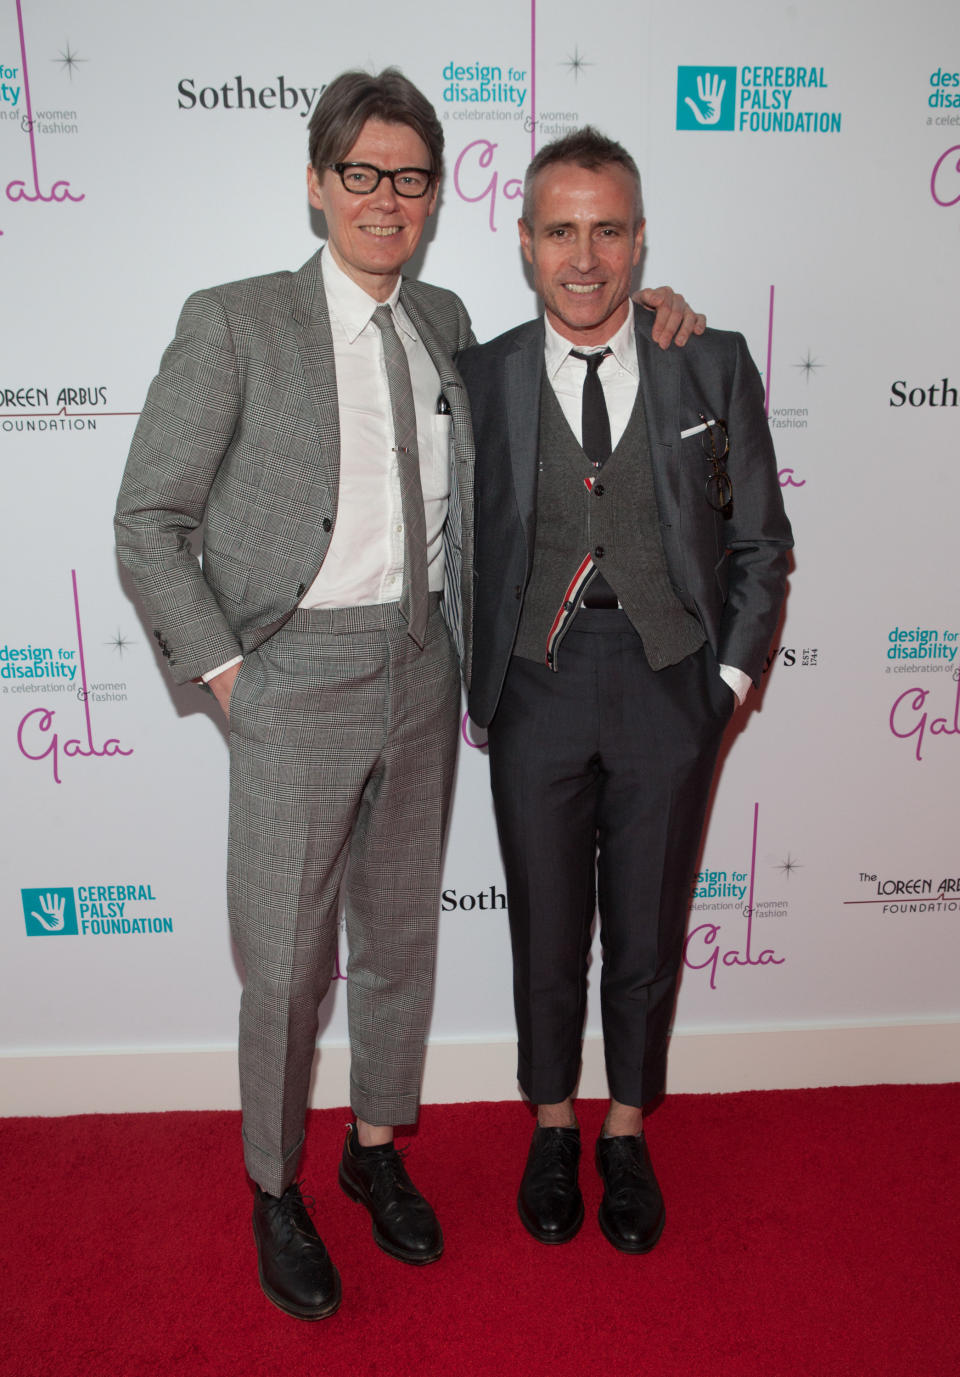 Andrew Bolton and Thom Browne are one fashionable pair. Bolton, curator at The Costume Institute, and Browne, a fashion designer, almost always wear sharp, tailored pieces when out for events. In this photo, they're sporting coordinating gray ensembles at the 2016 Design for Disability Gala at Sotheby's in New York City on May 16, 2016.&nbsp;